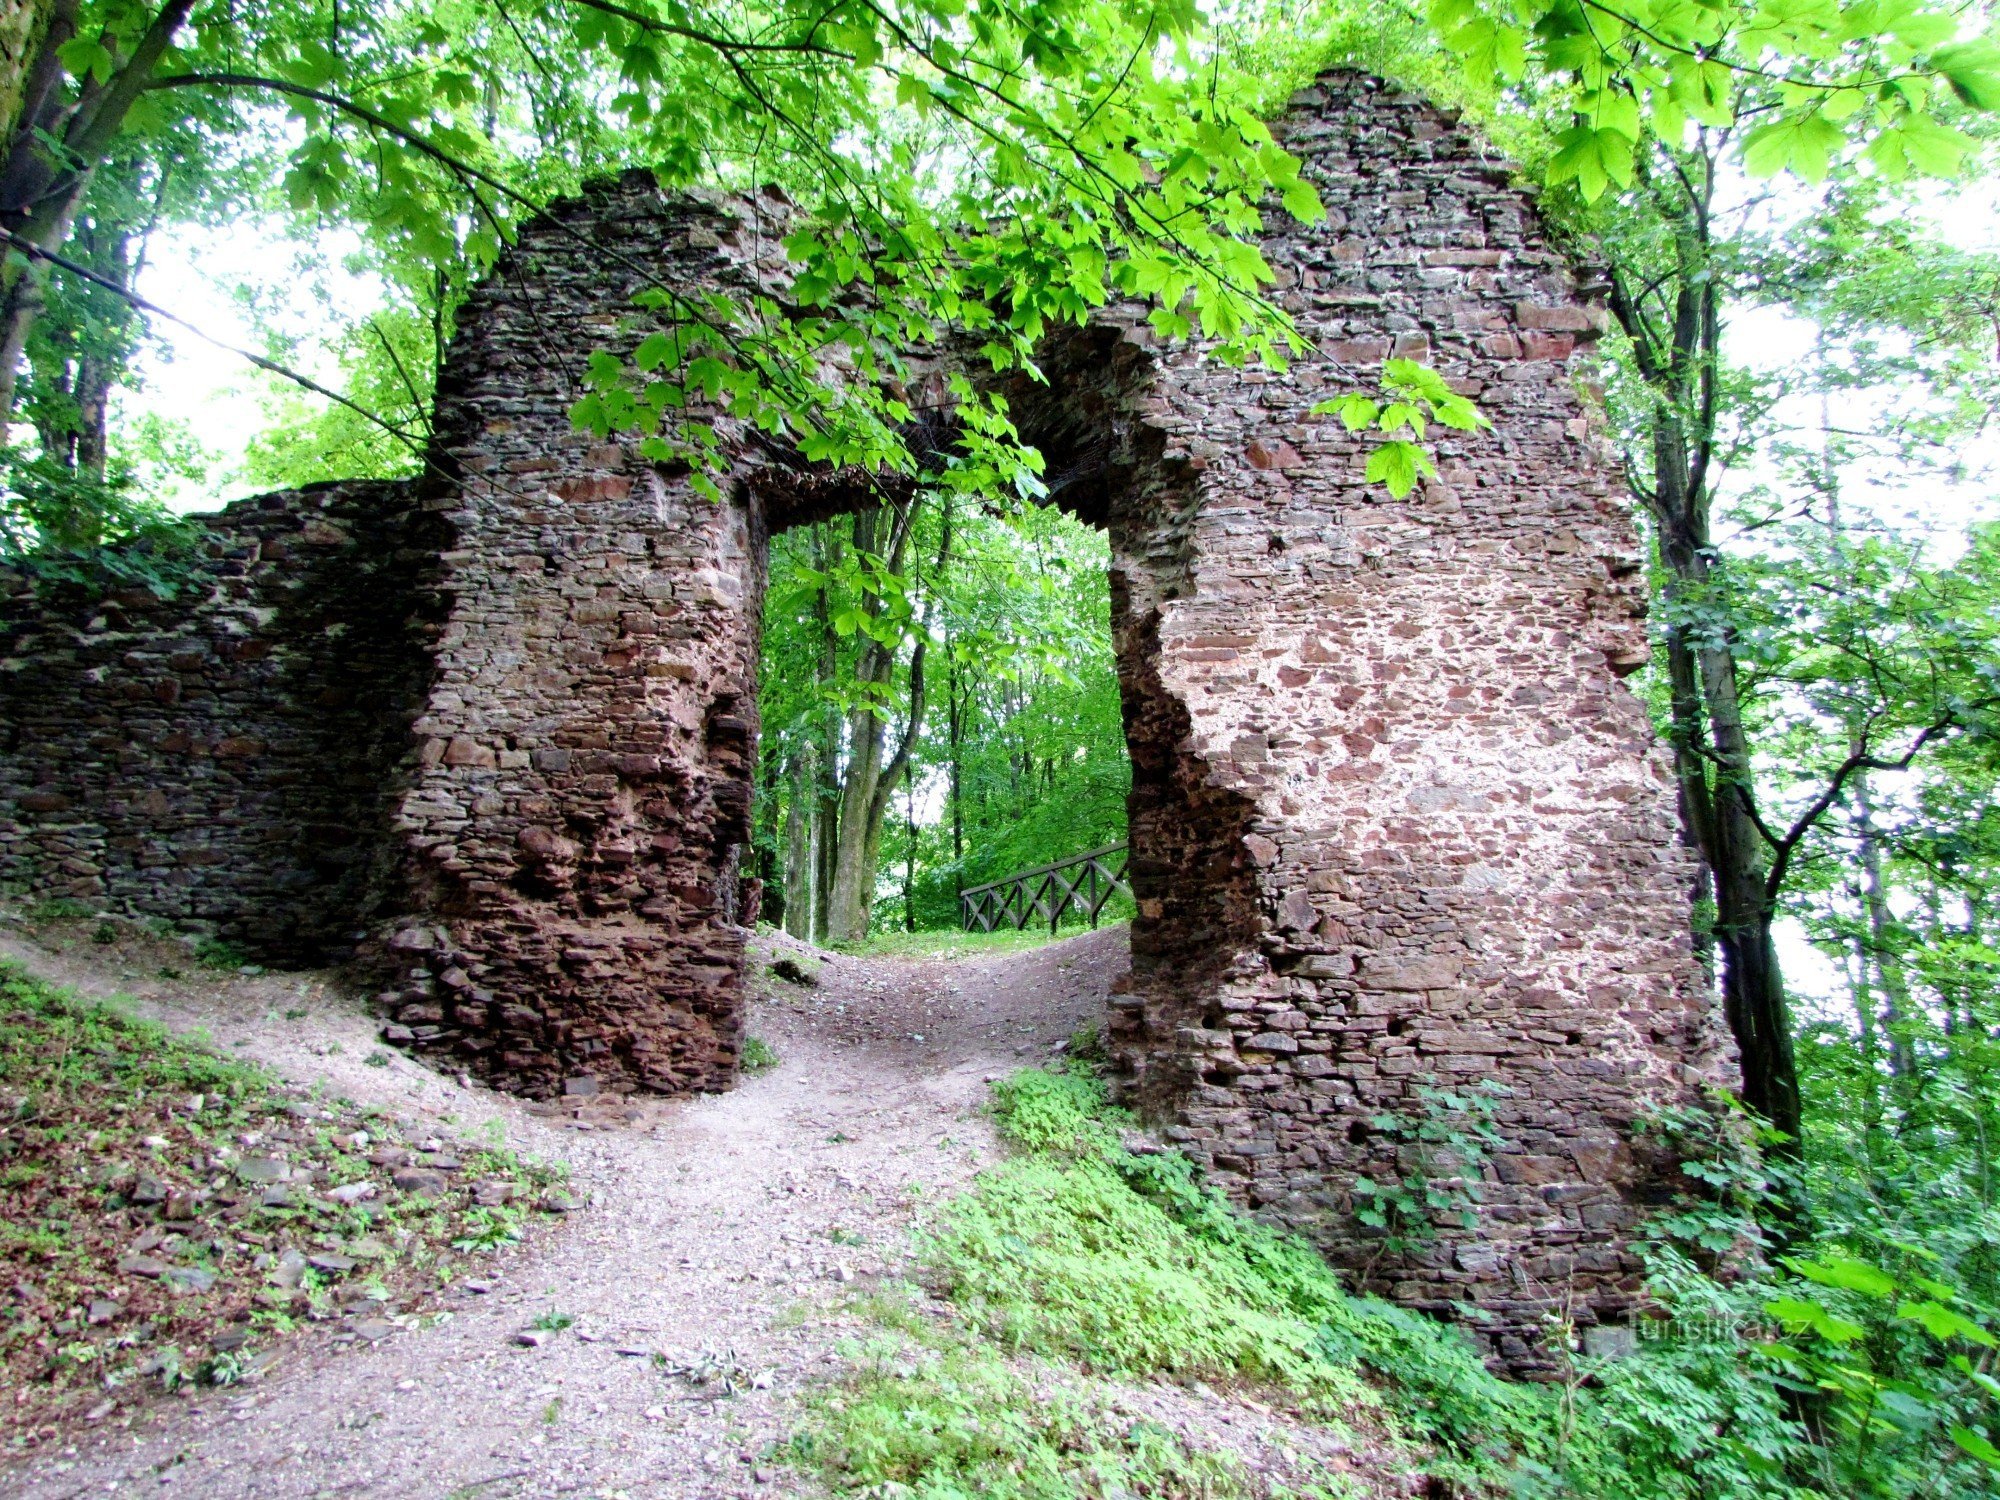 Behind the ruins of Cimburk in the town of Trnávka